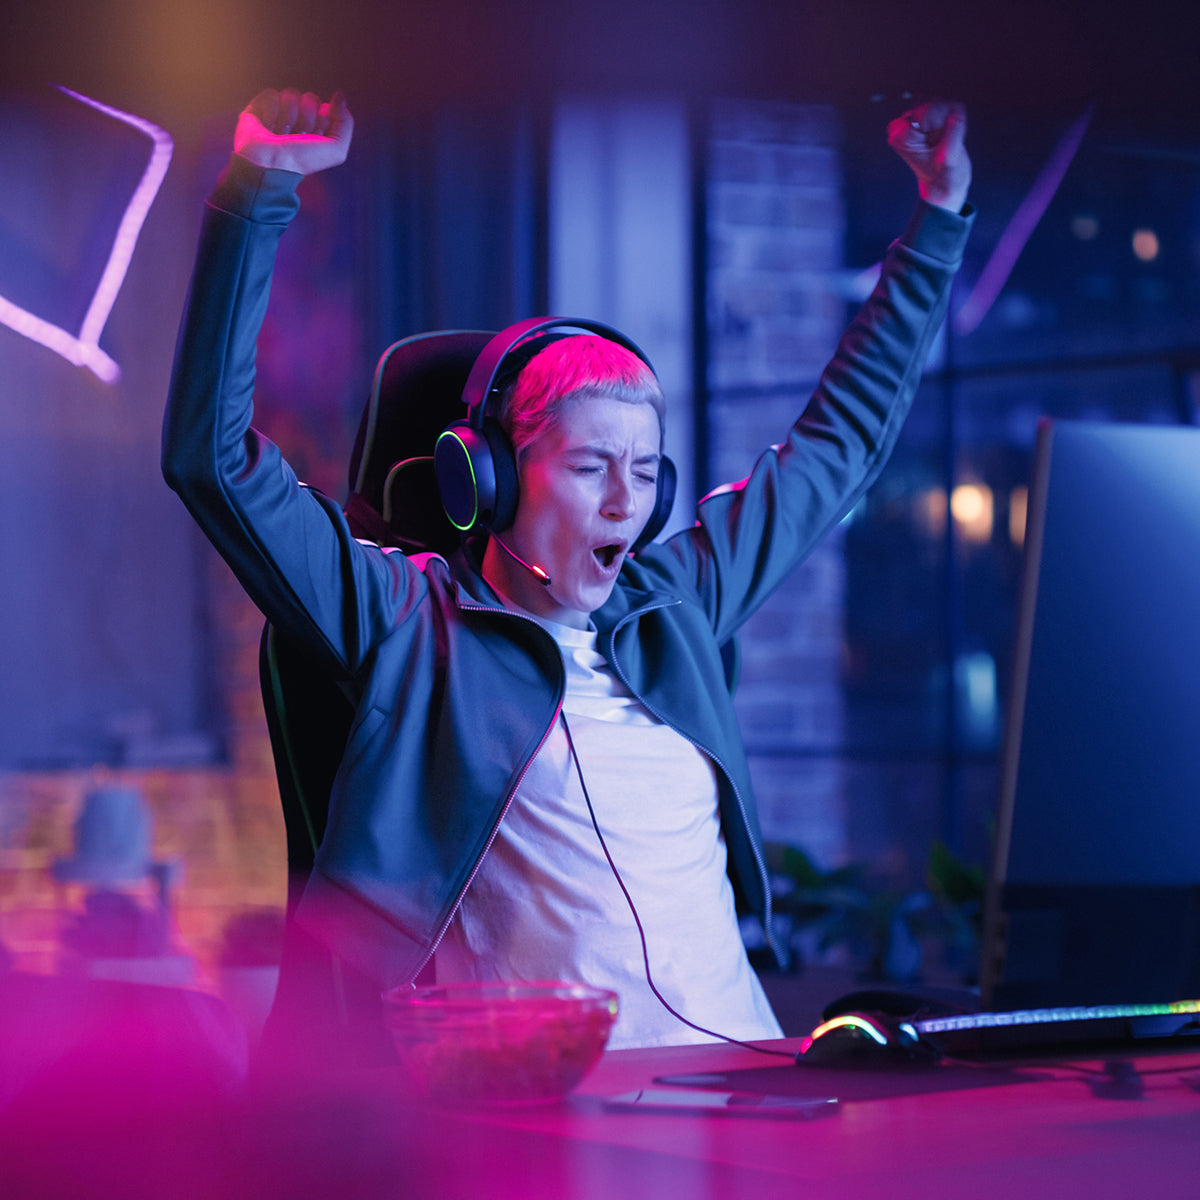 A game player wearing headphones has won the game